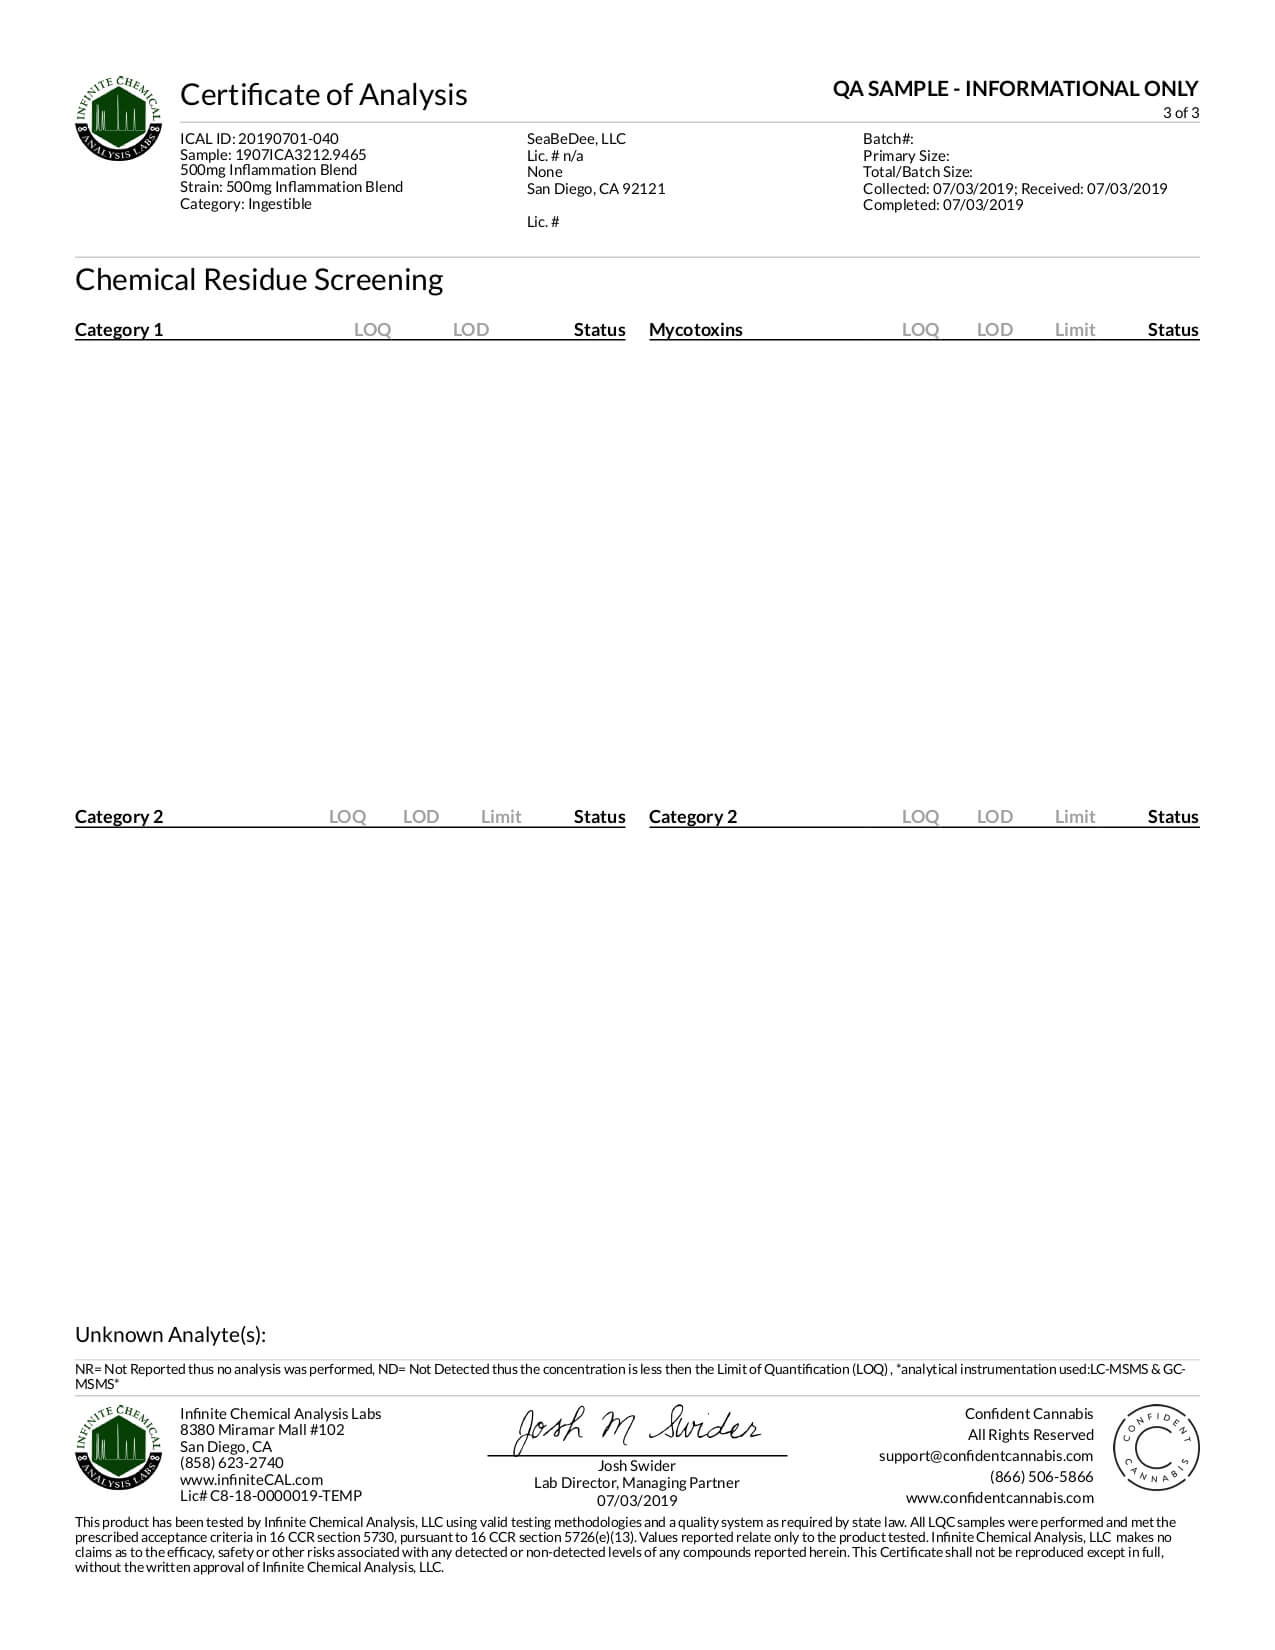 Seabedee CBD Tincture Inflammation Blend 500mg Lab Report